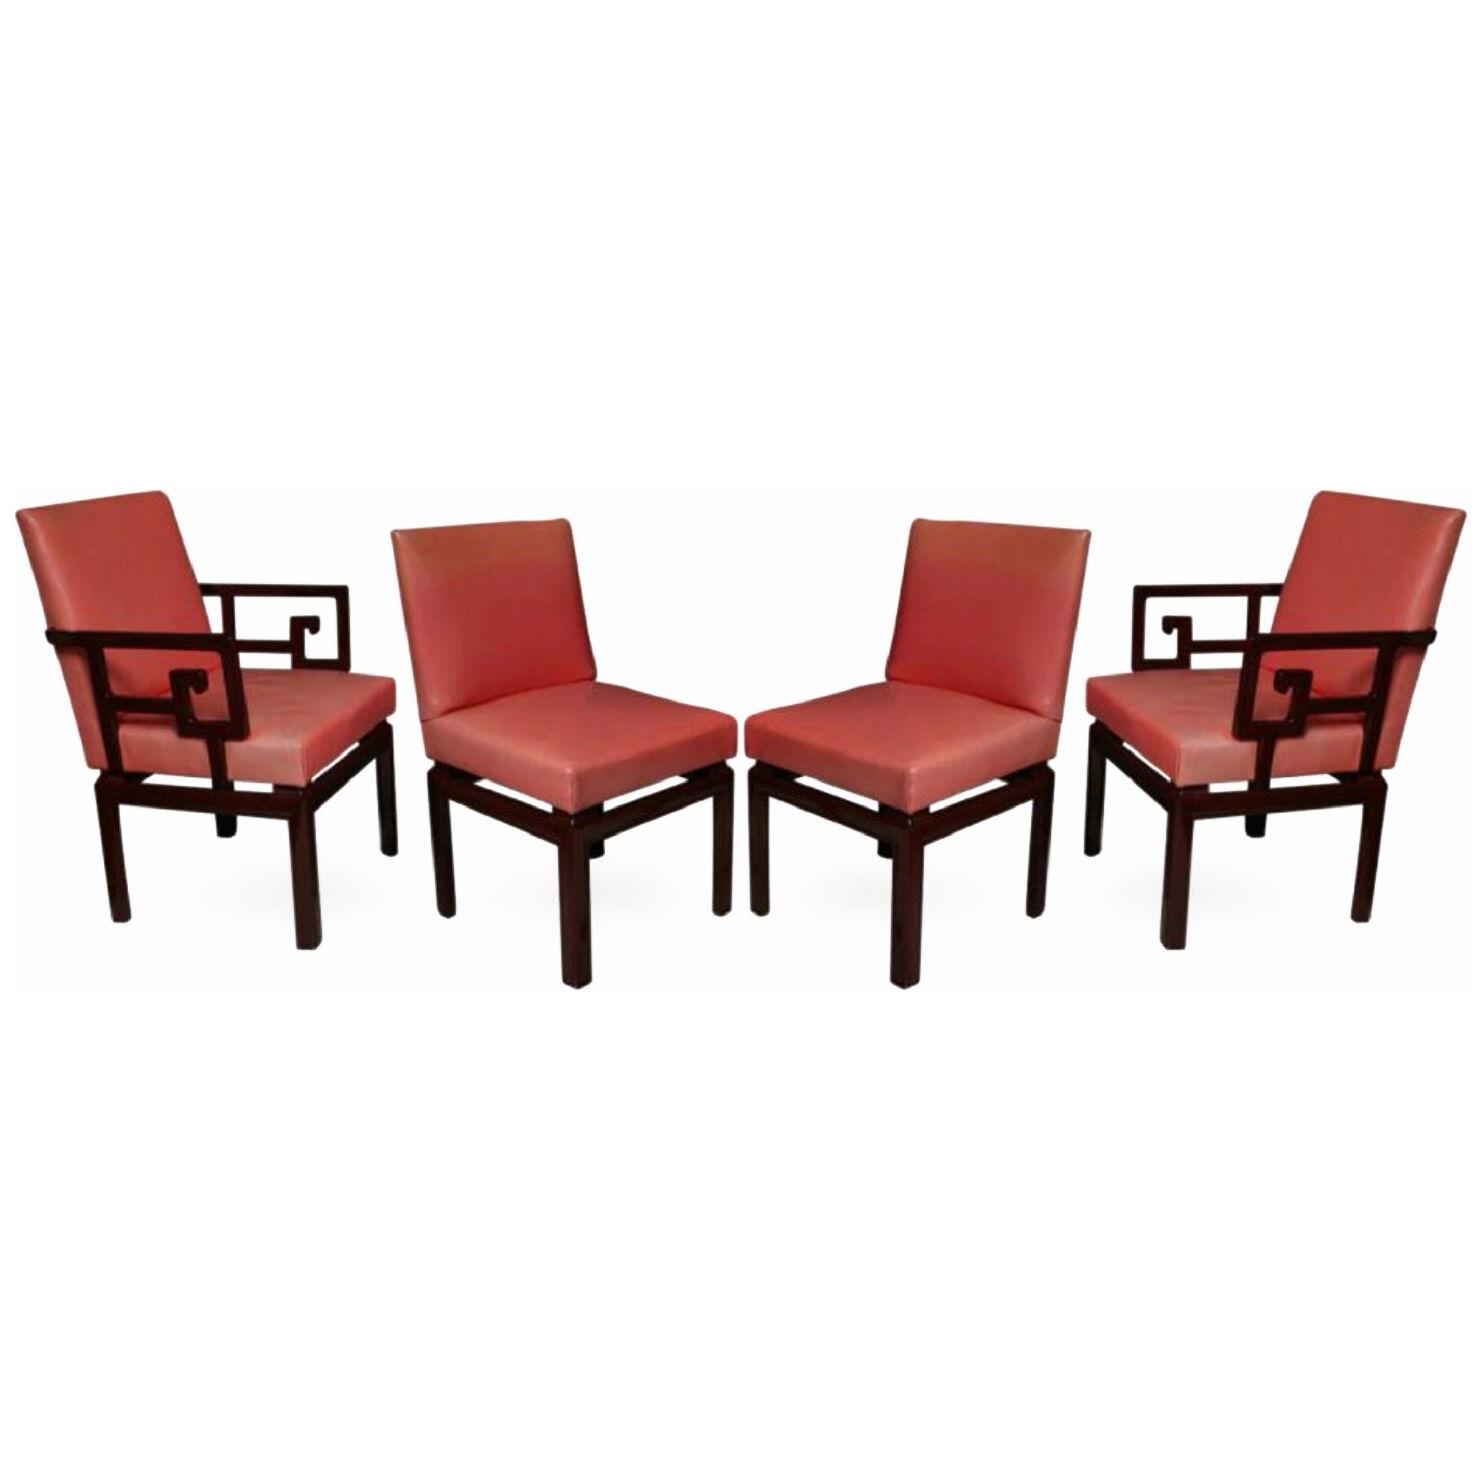 Set of Four American Modern Mahogany "Far East" Dining Chairs, Michael Taylor